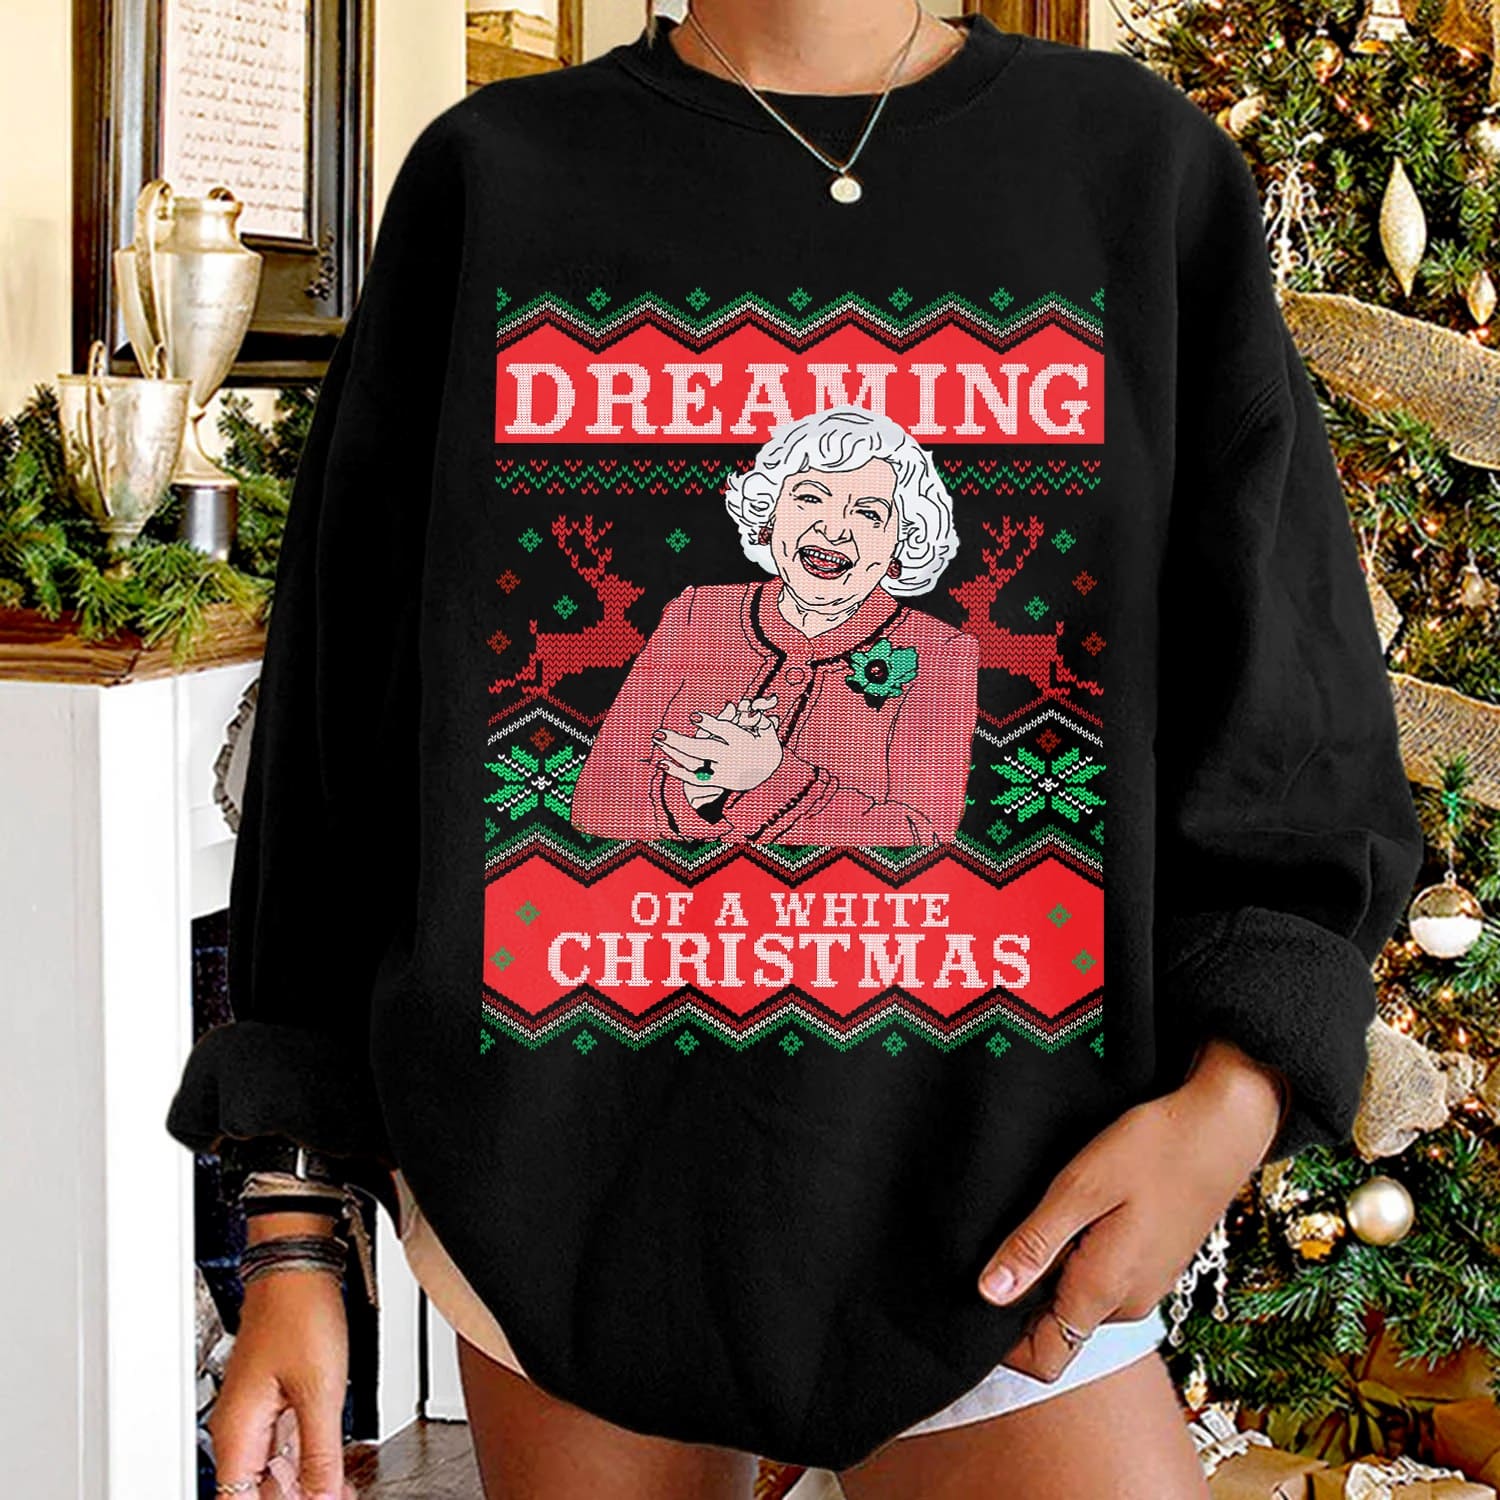 Betty White Ugly Christmas Sweater - Dreaming of a white christmas